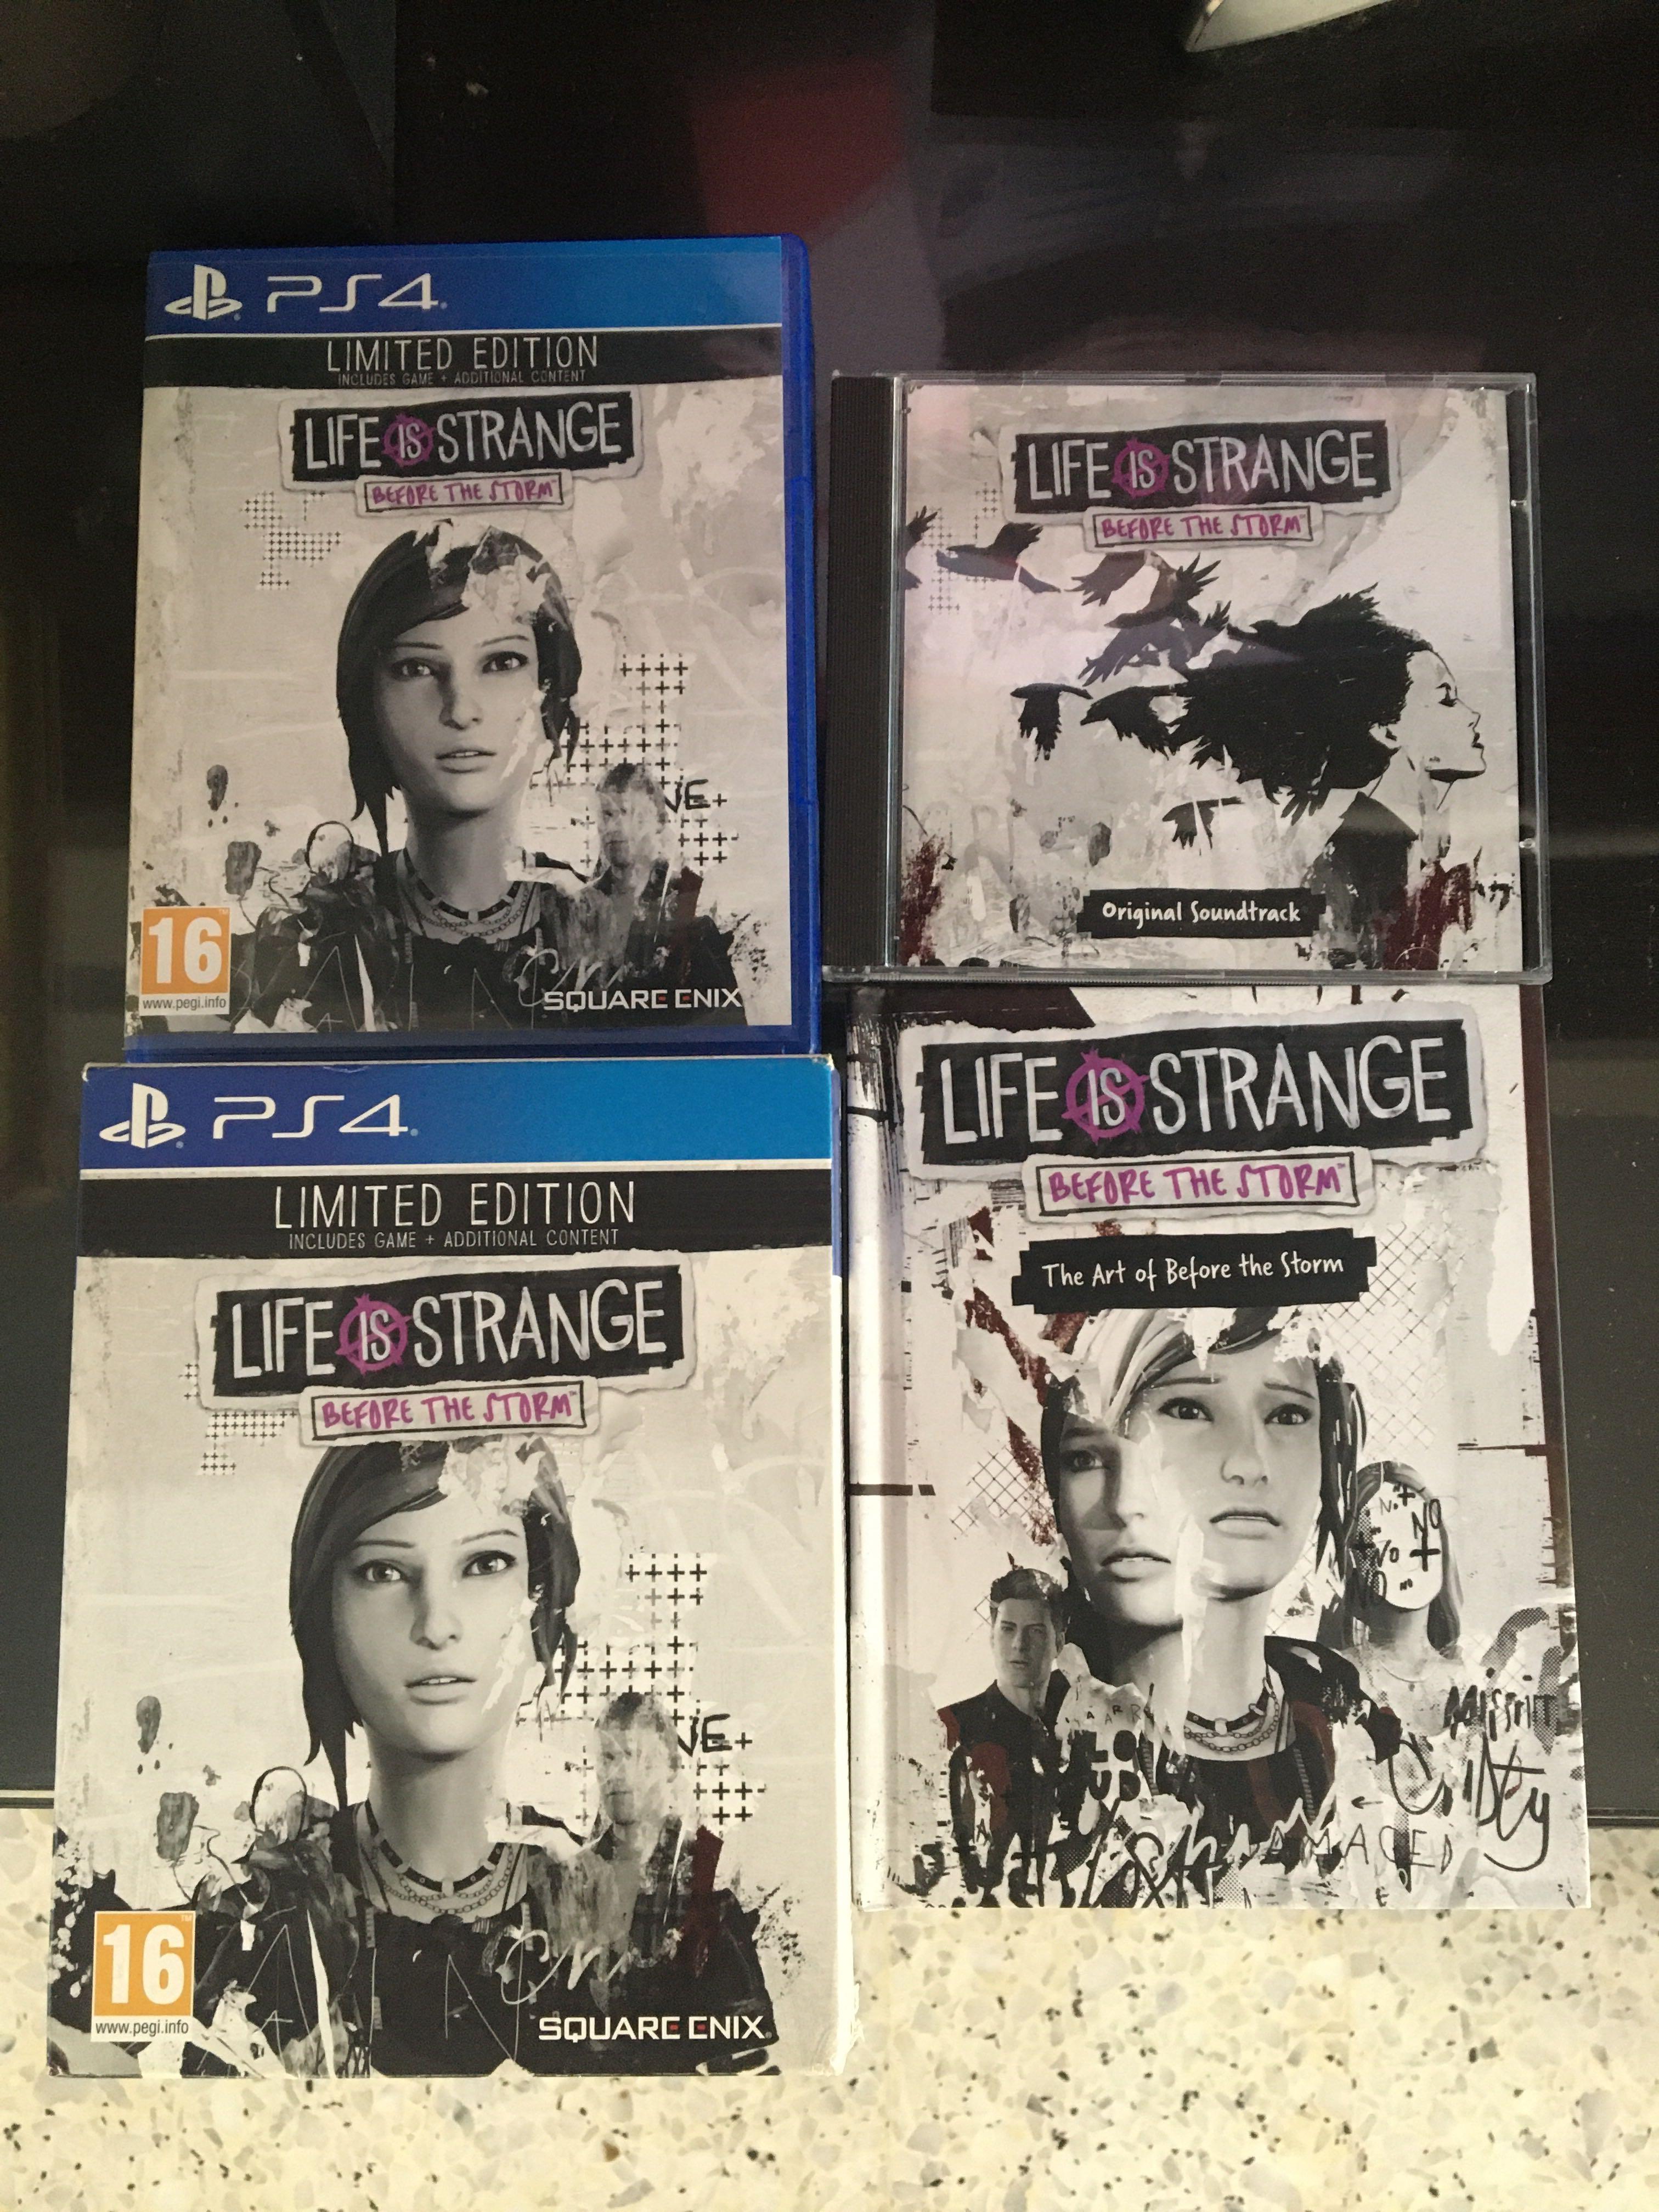 Life is Strange: Before The Storm Limited Edition - PlayStation 4